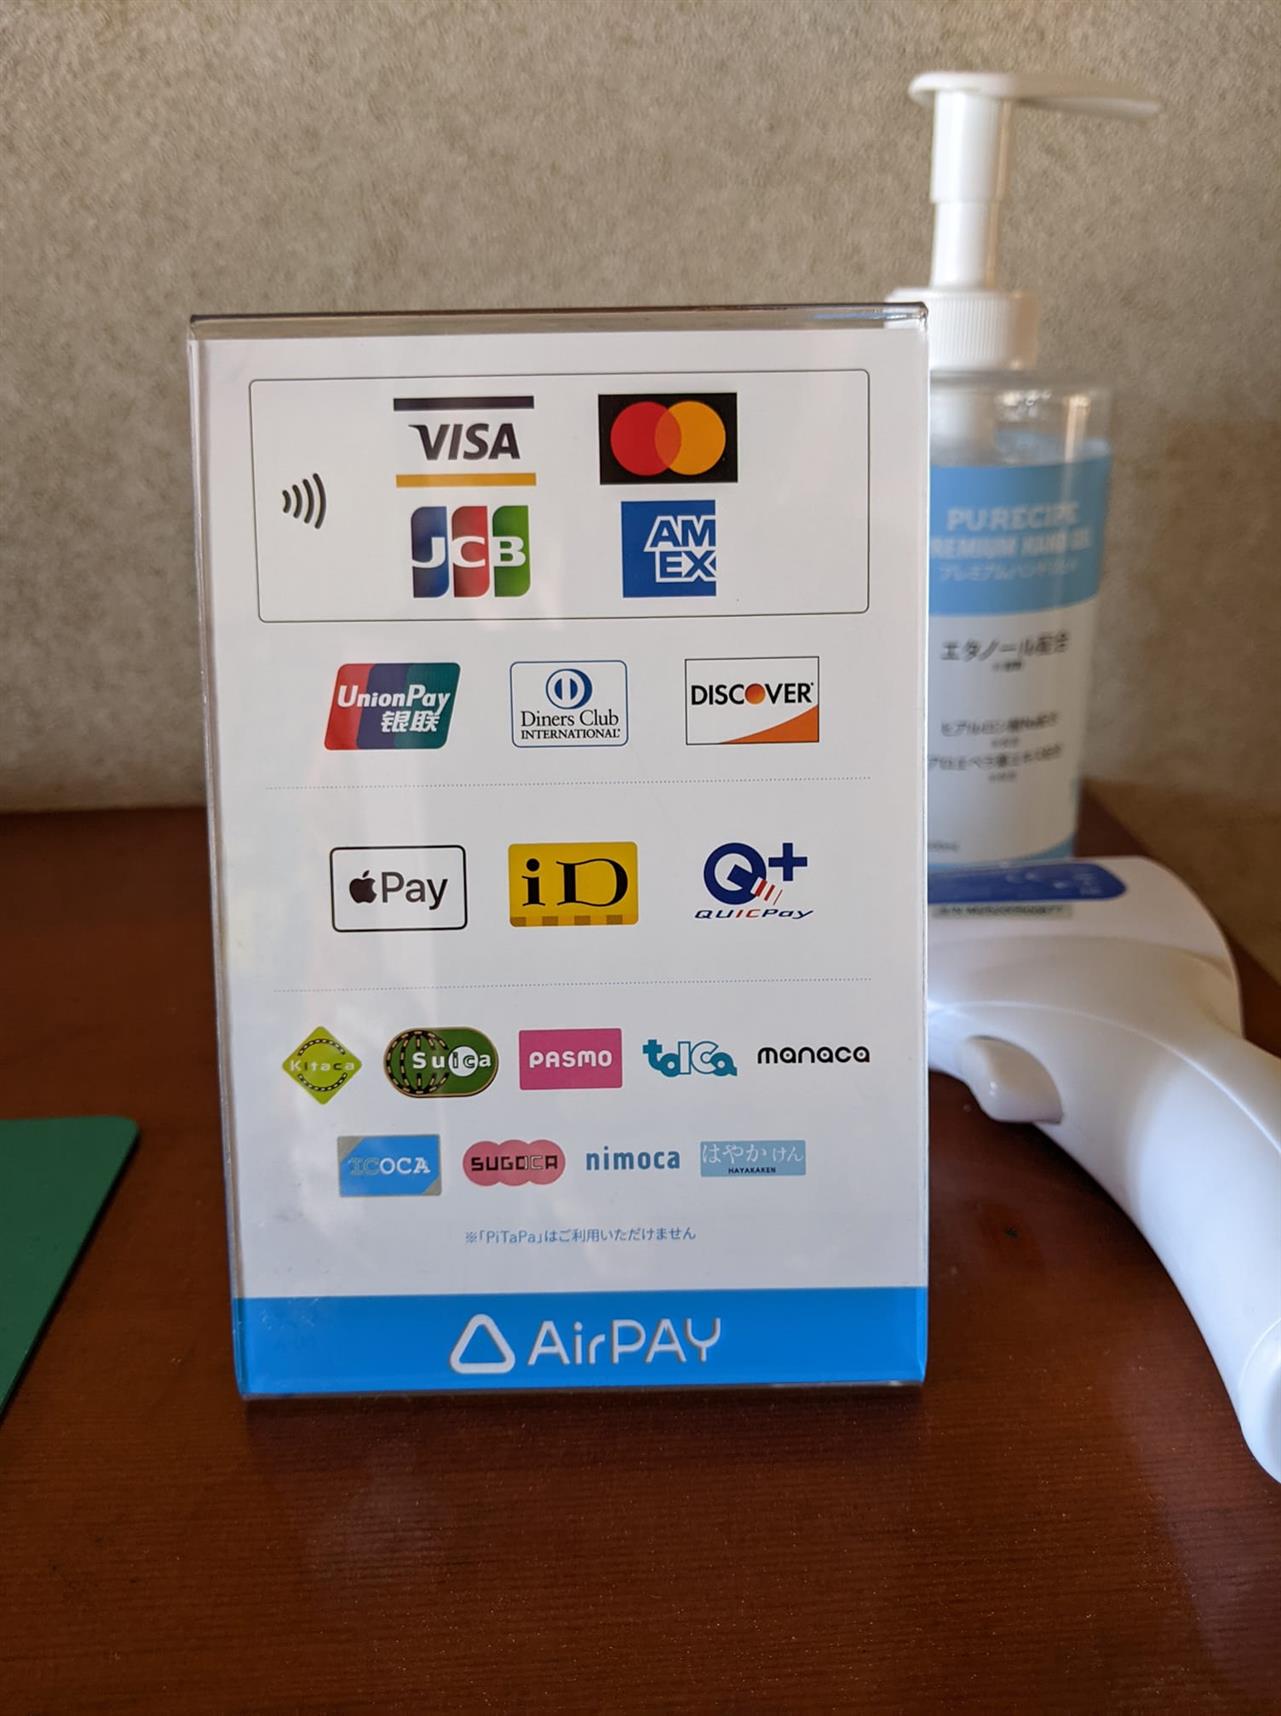 Q. クレジットカードは使用できますか？ Can I pay with Credit Cards?